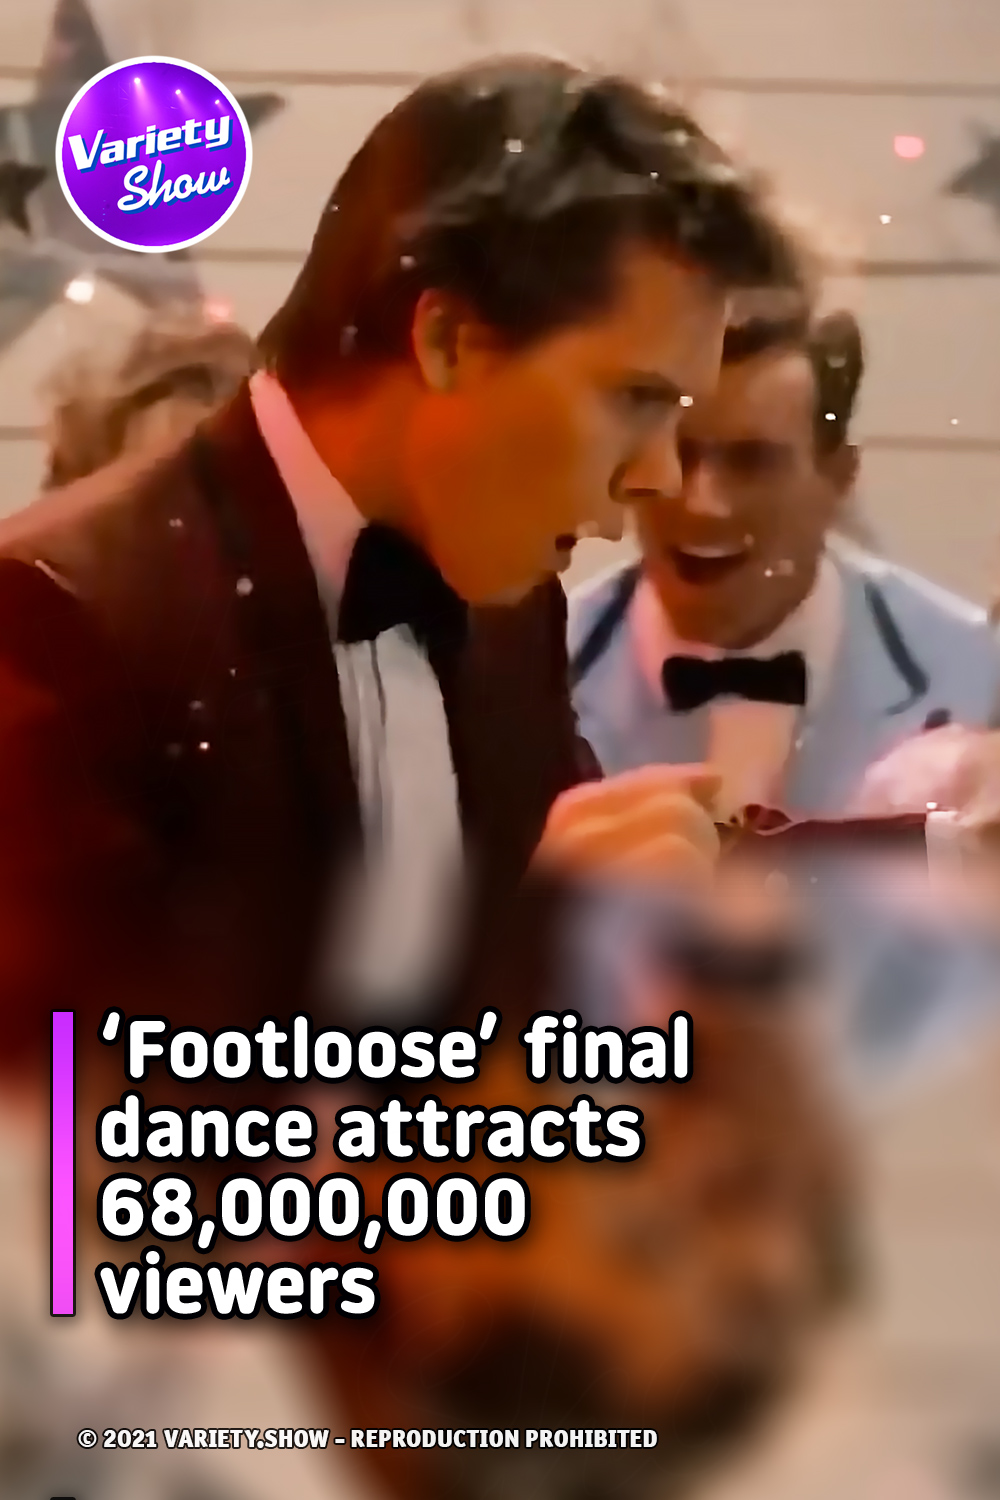 ‘Footloose’ final dance attracts 68,000,000 viewers